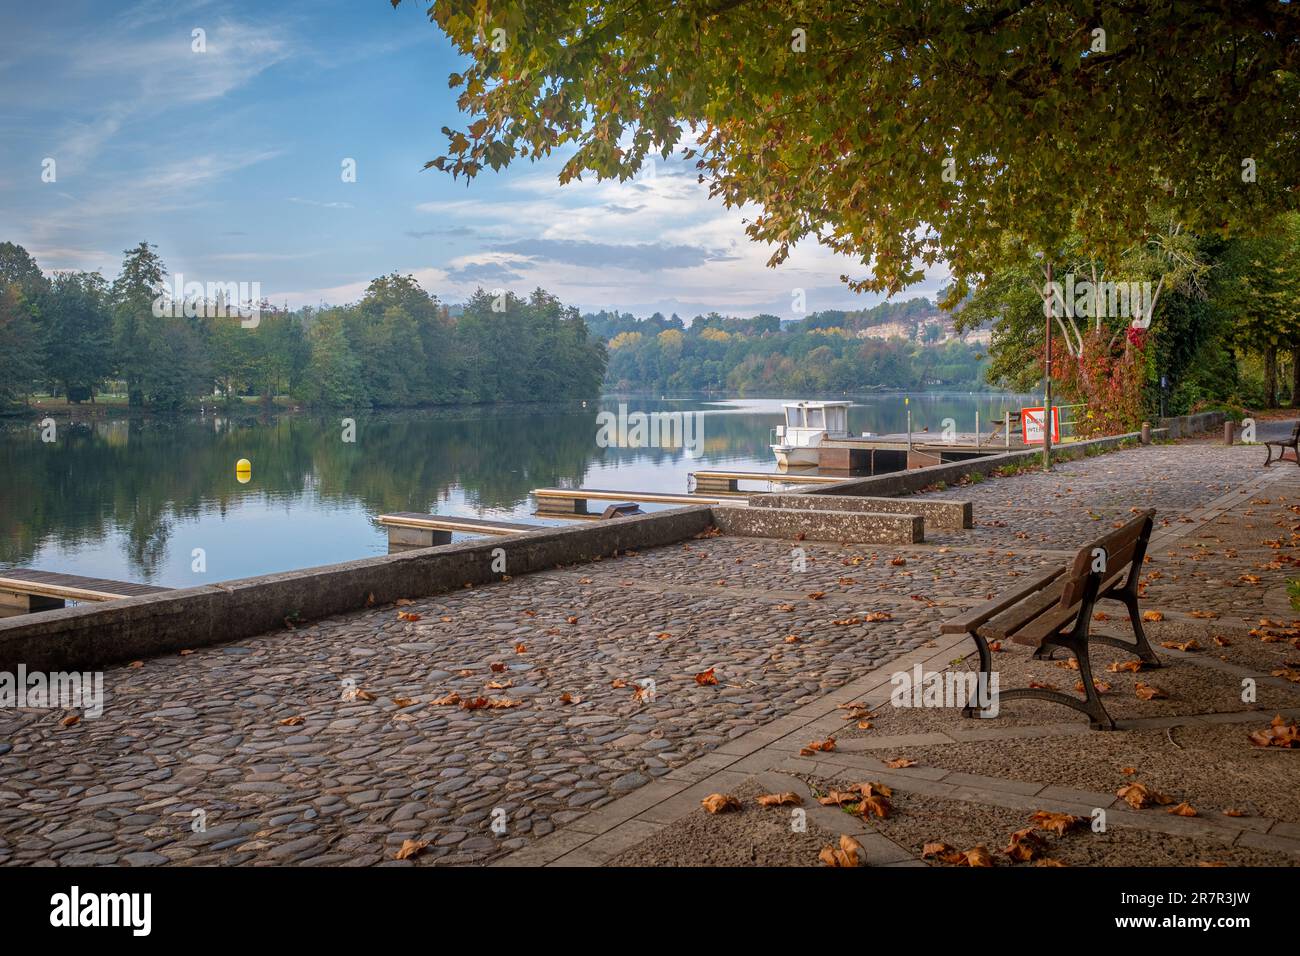 Lot river seen from Cajarc, Southwest France, taken with a bench in the foreground on a sunny autumn morning with no people Stock Photo